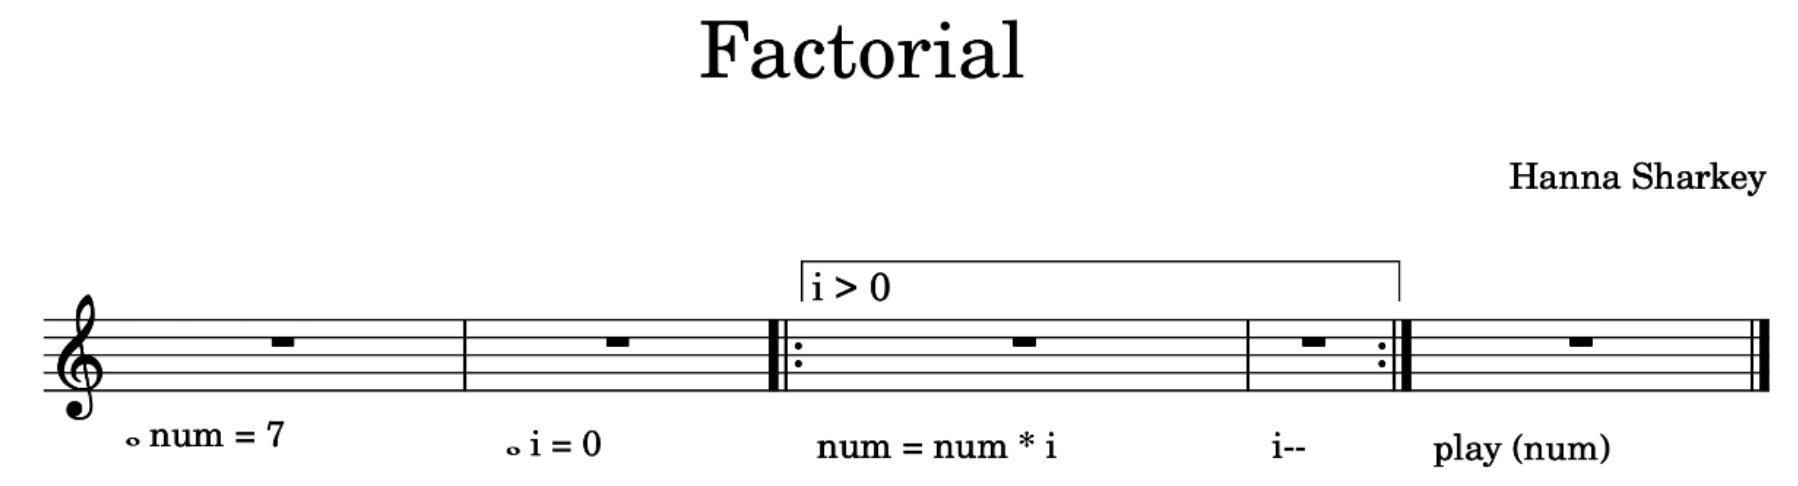 Factorial expressed in musical notation